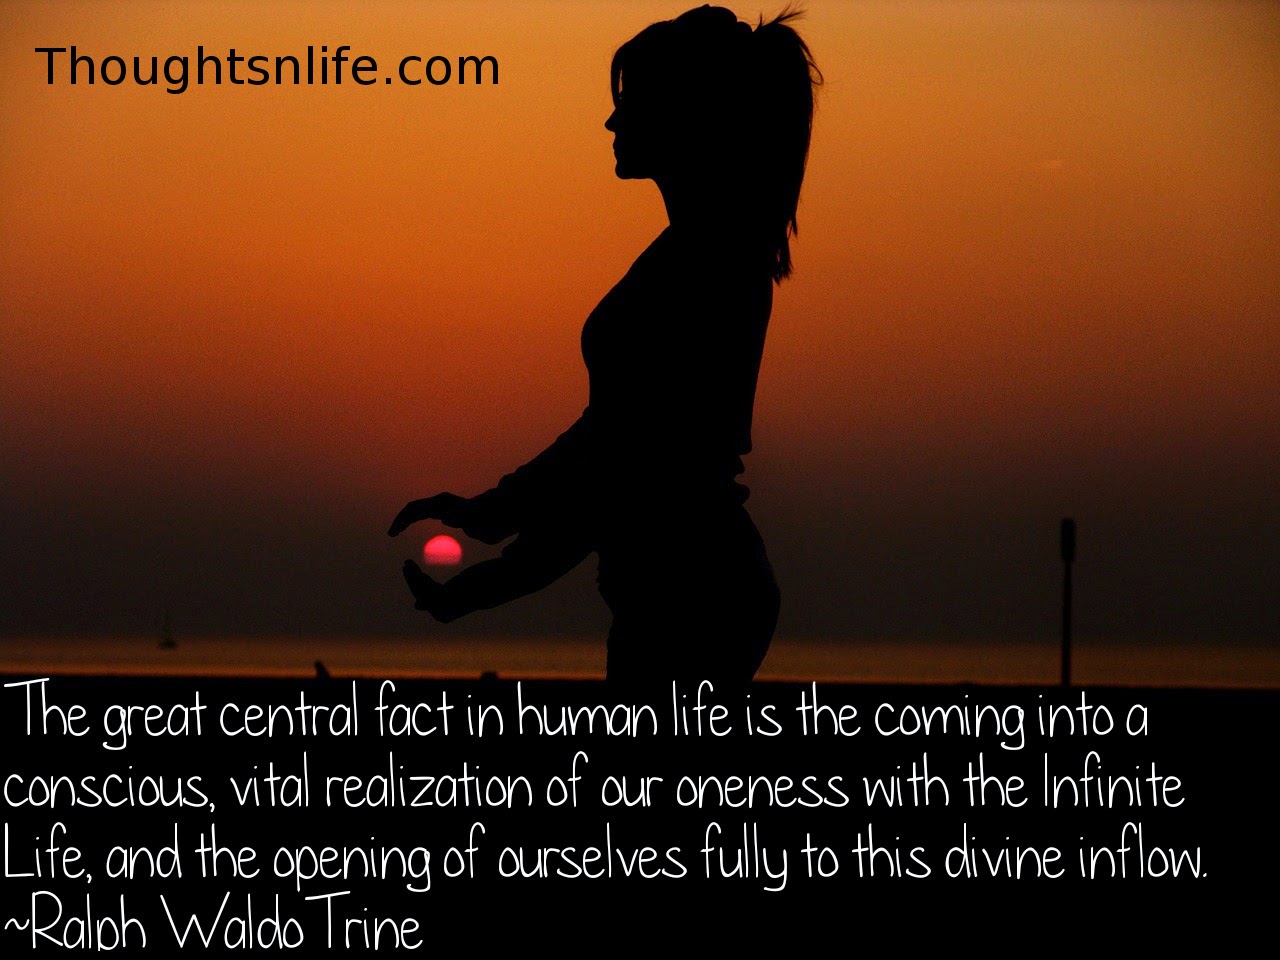 Thoughtsnlife.com: The great central fact in human life is the coming into a conscious, vital realization of our oneness with the Infinite Life, and the opening of ourselves fully to this divine inflow. Ralph Waldo Trine